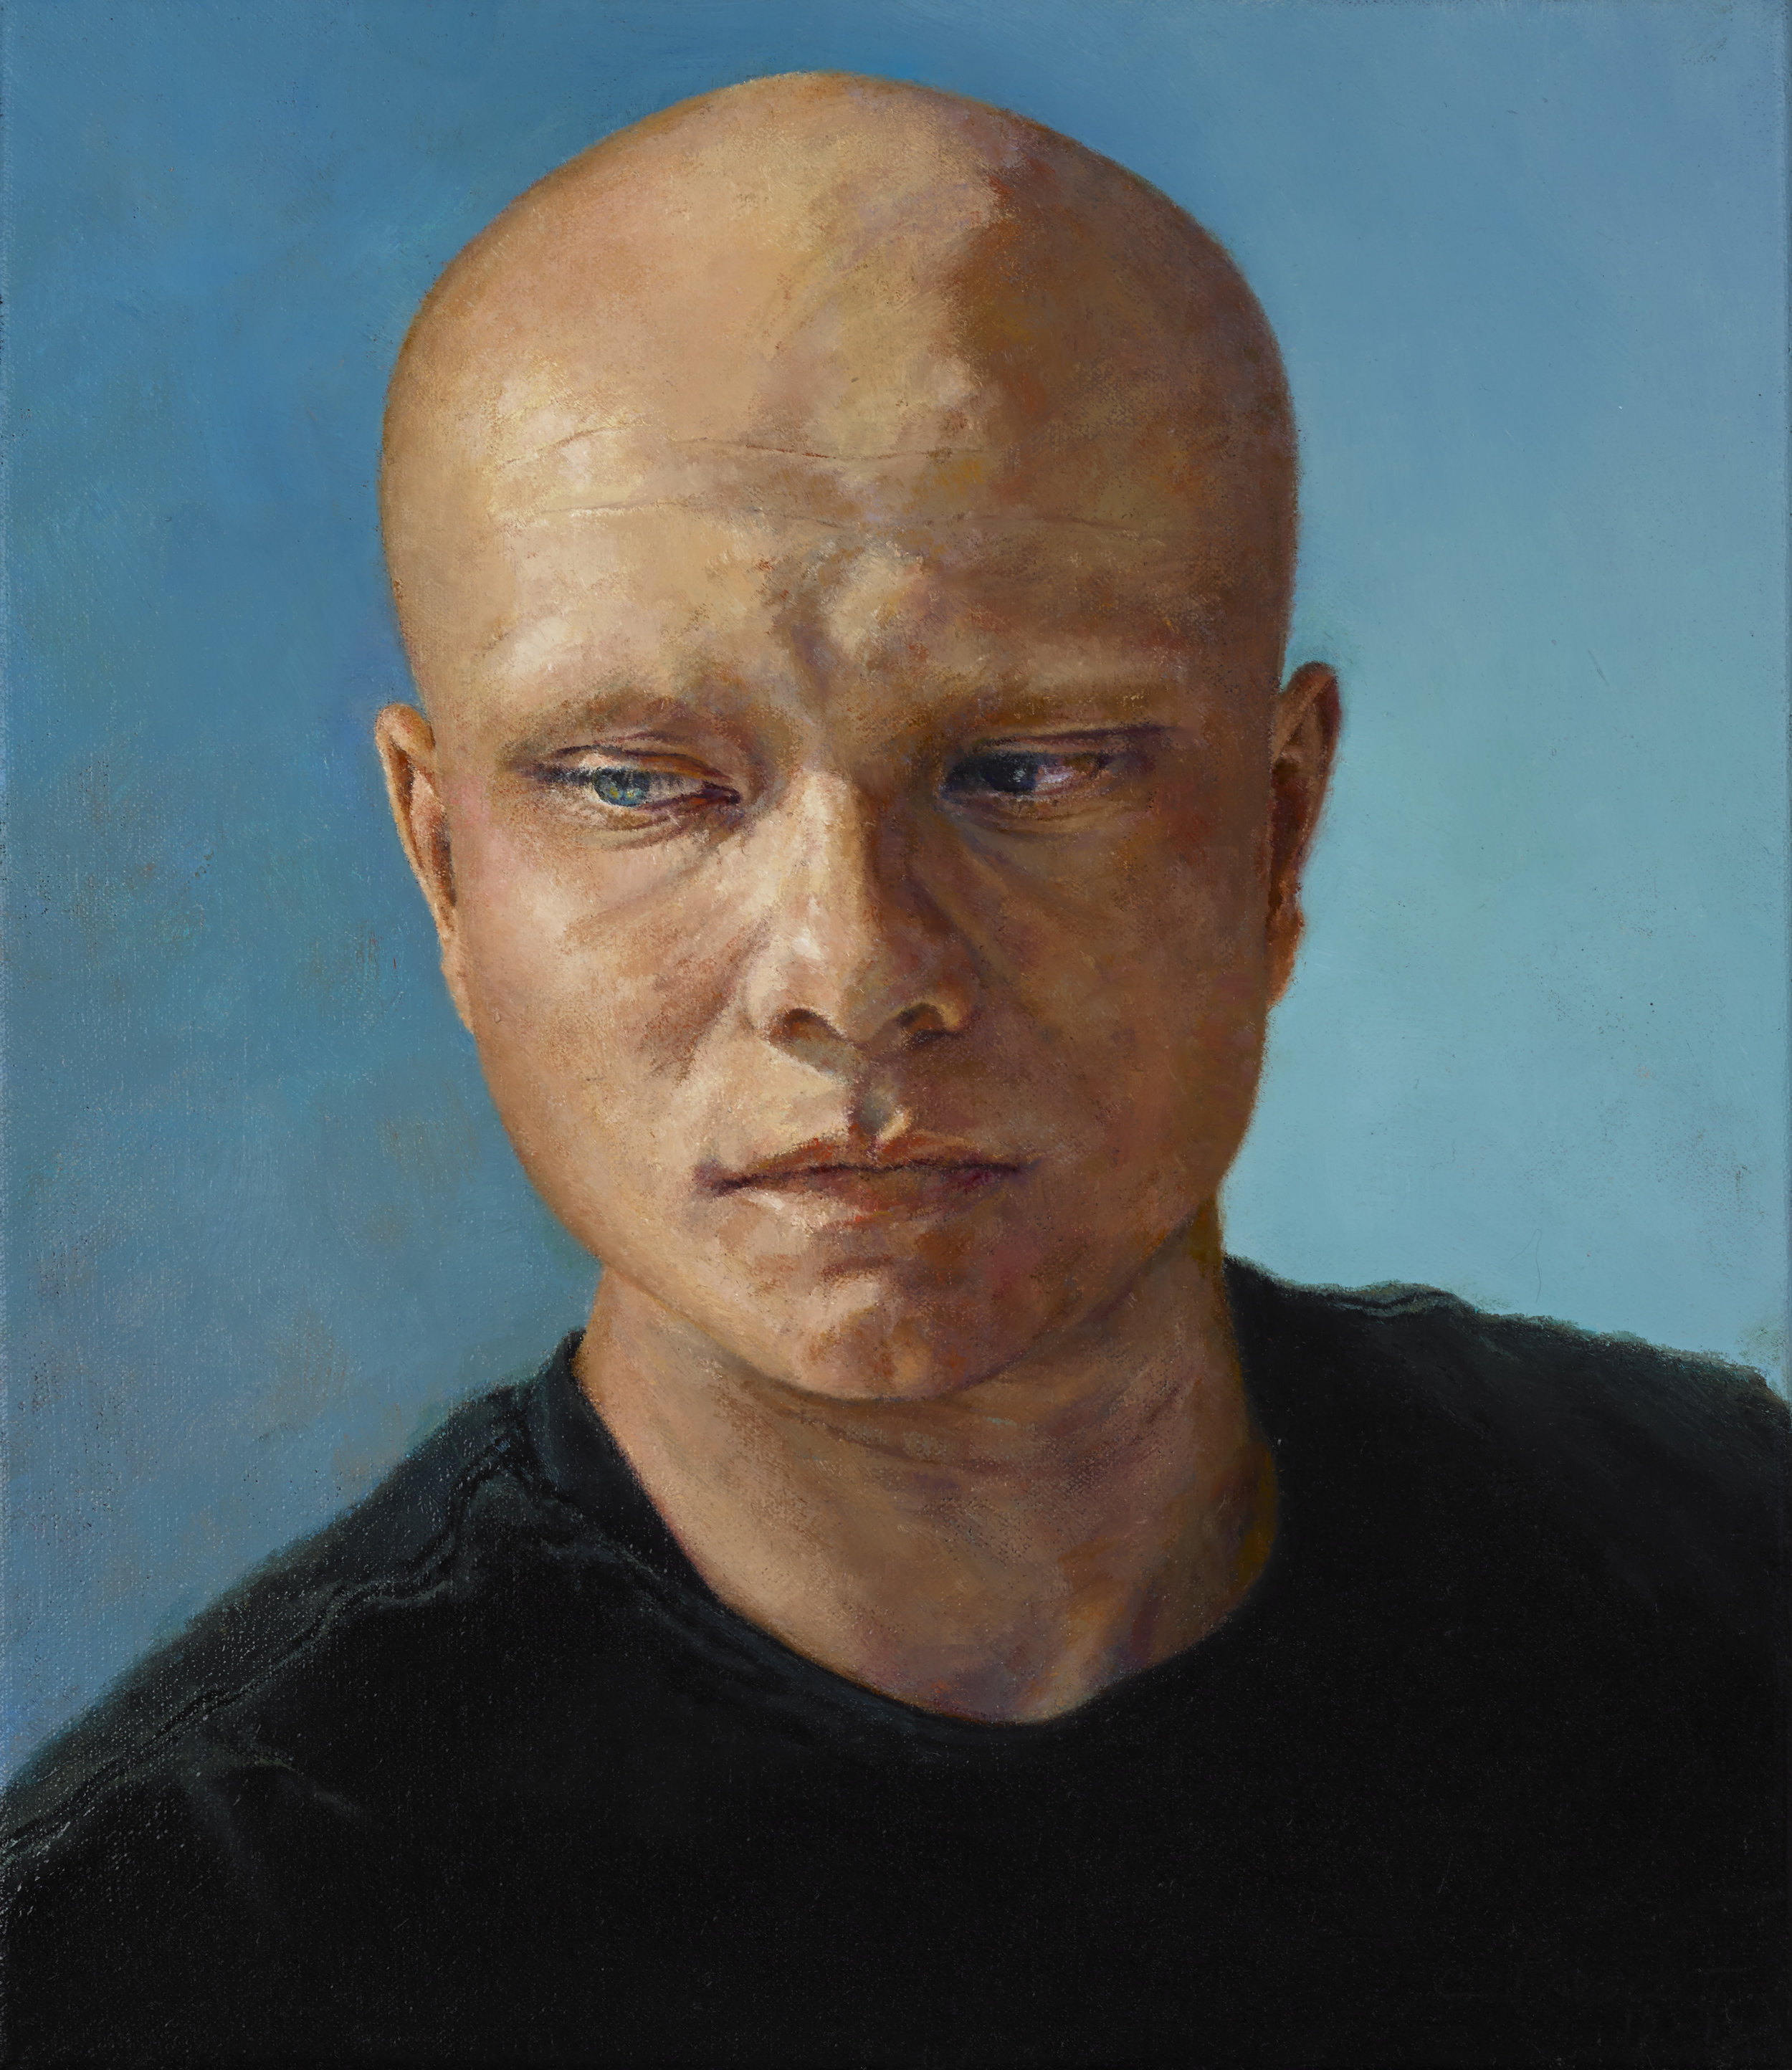   Skylar , Oil on Canvas, 2014, 15" x 13", Private Collection 